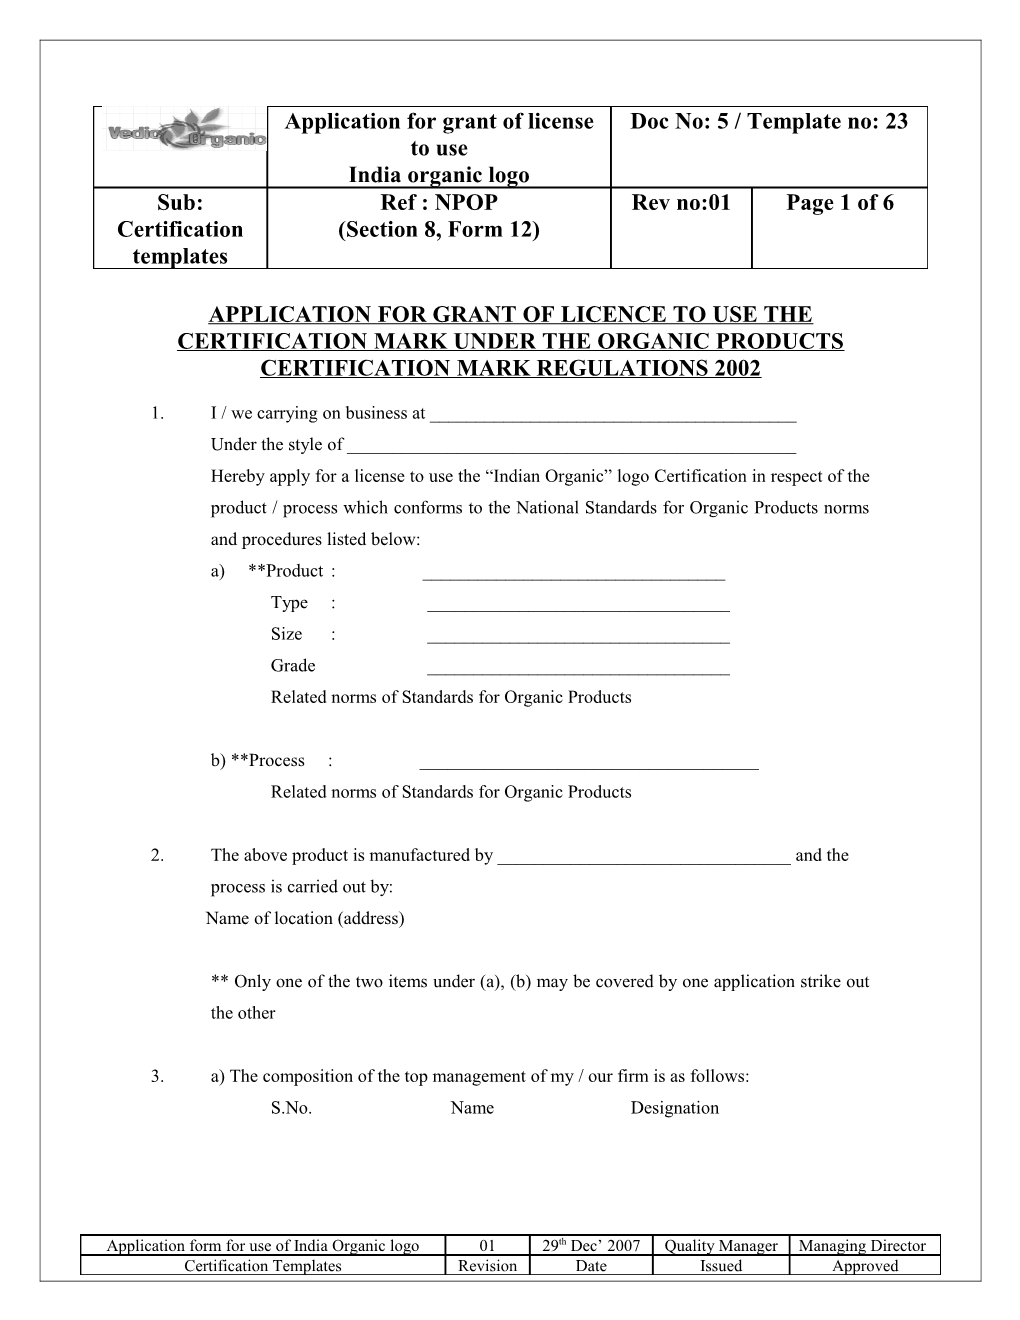 Application for Grant of Licence to Use the Certification Mark Under the Organic Products